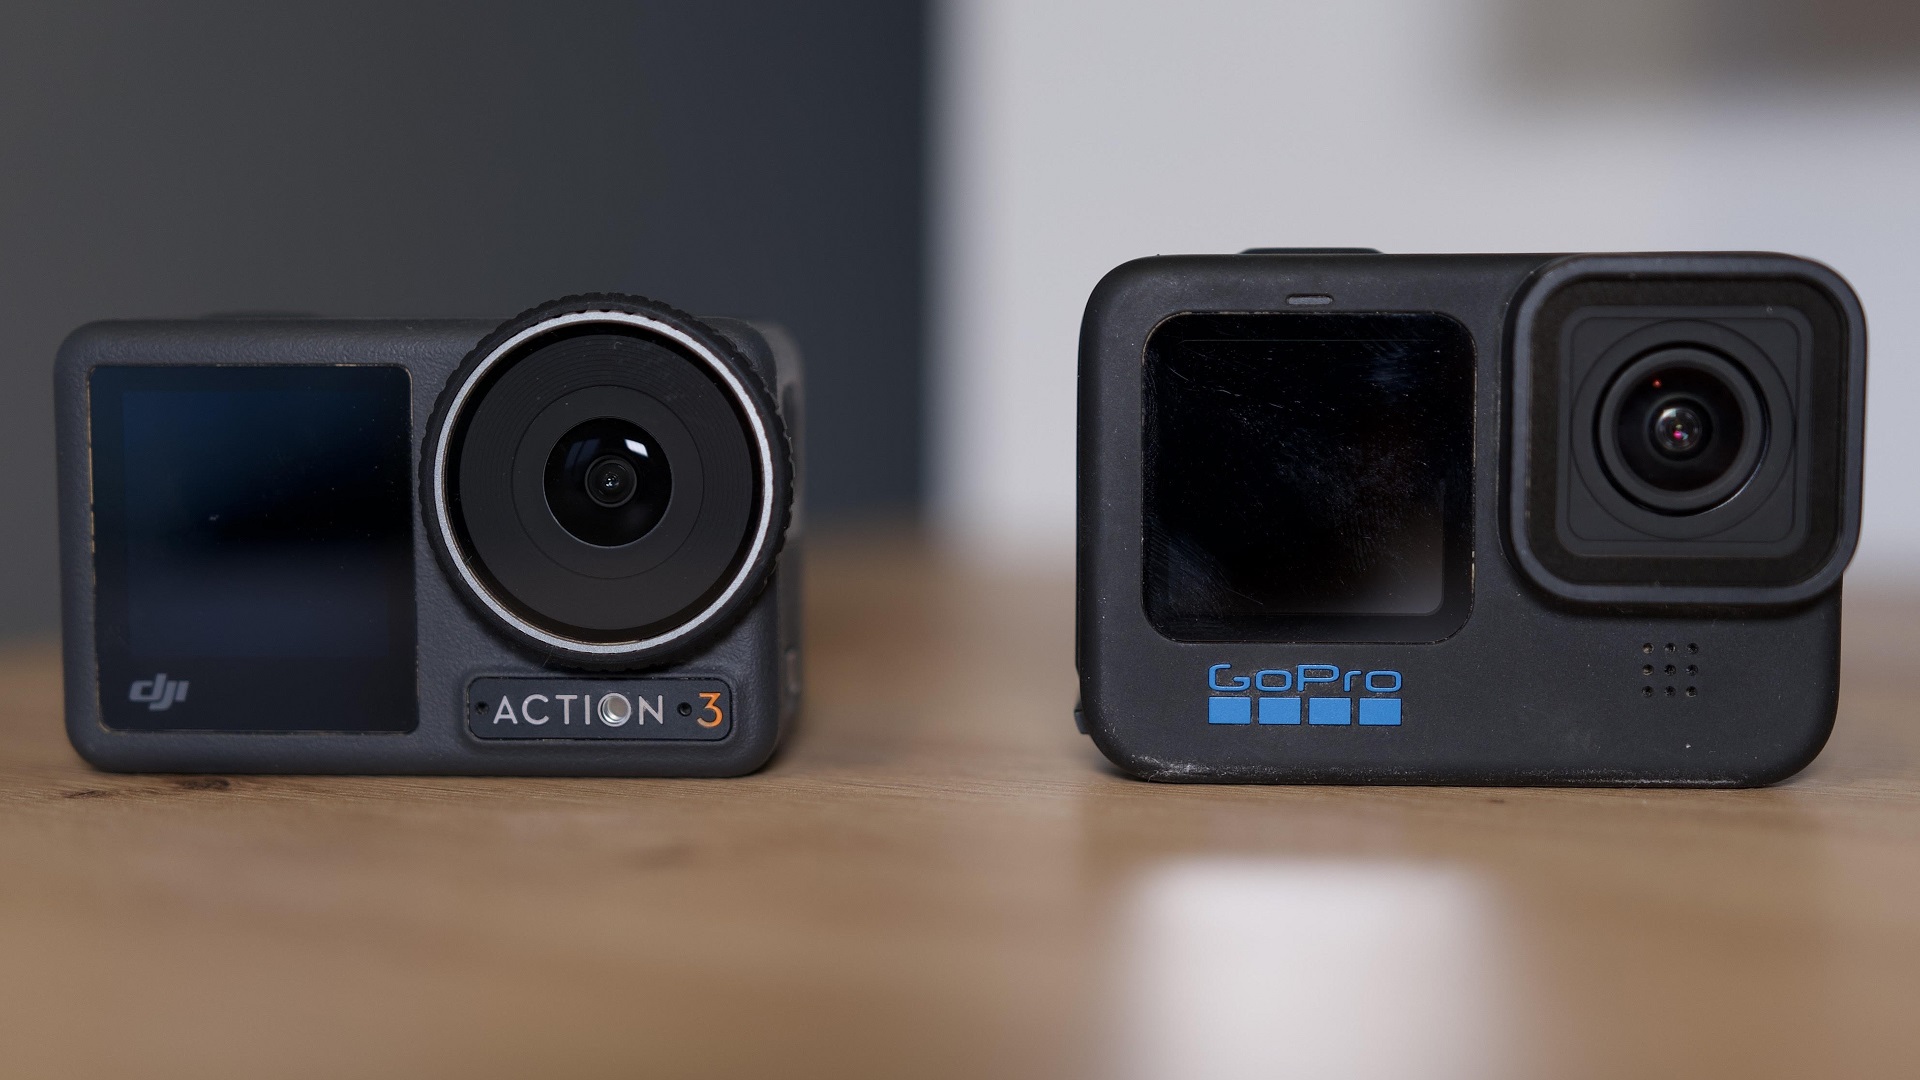 GoPro HERO11 vs. DJI Osmo Action 3 - What's the Better Action Cam?